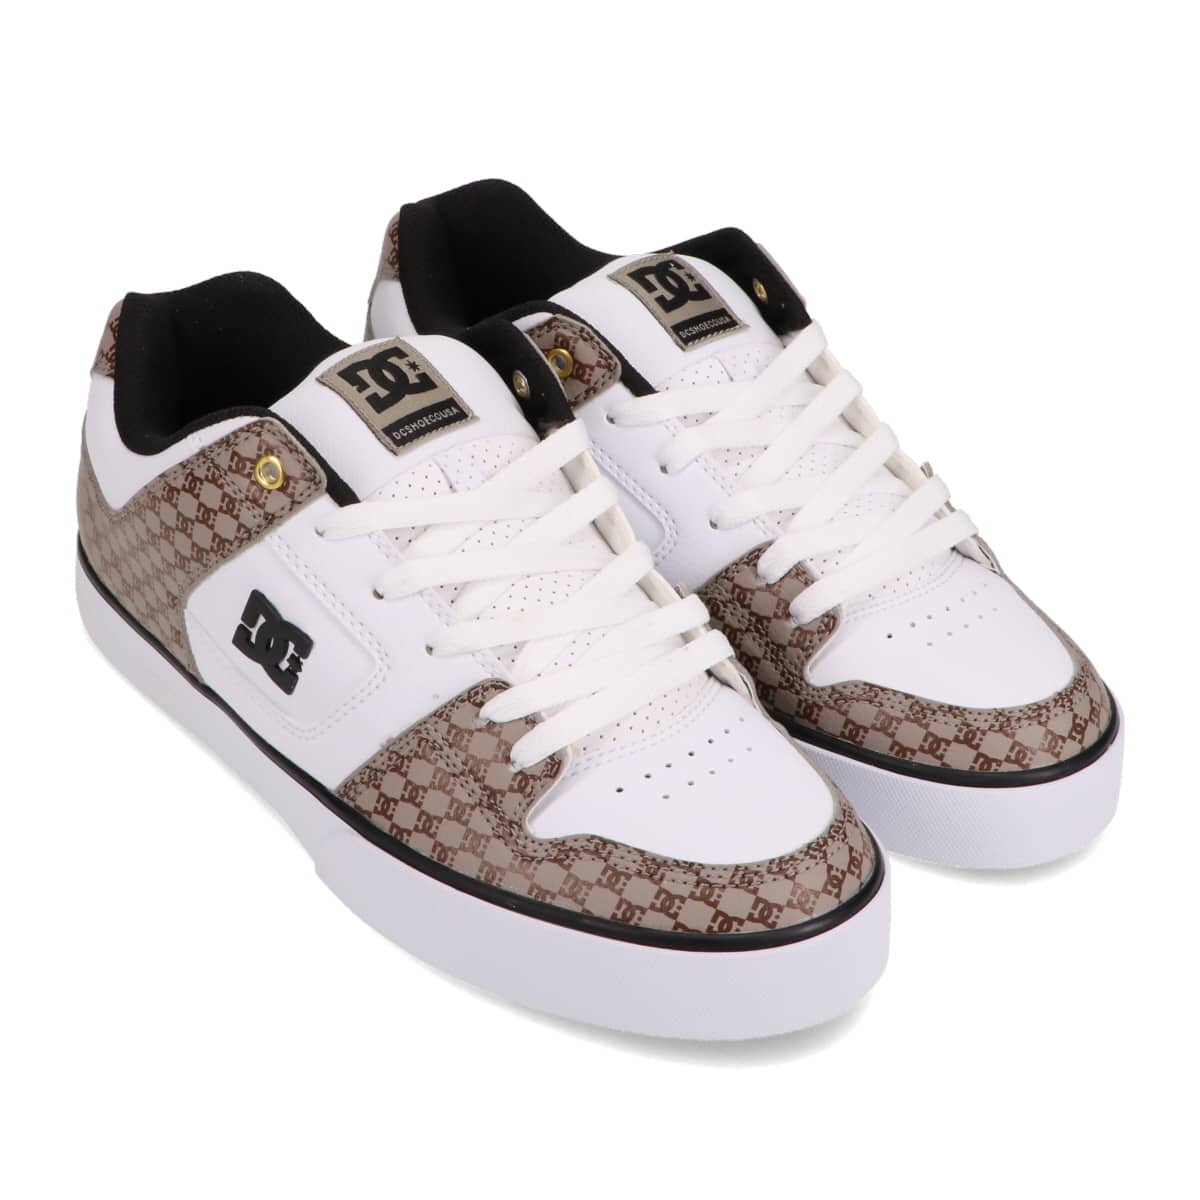 33 Sports Dc shoes pure black white for Trend in 2022